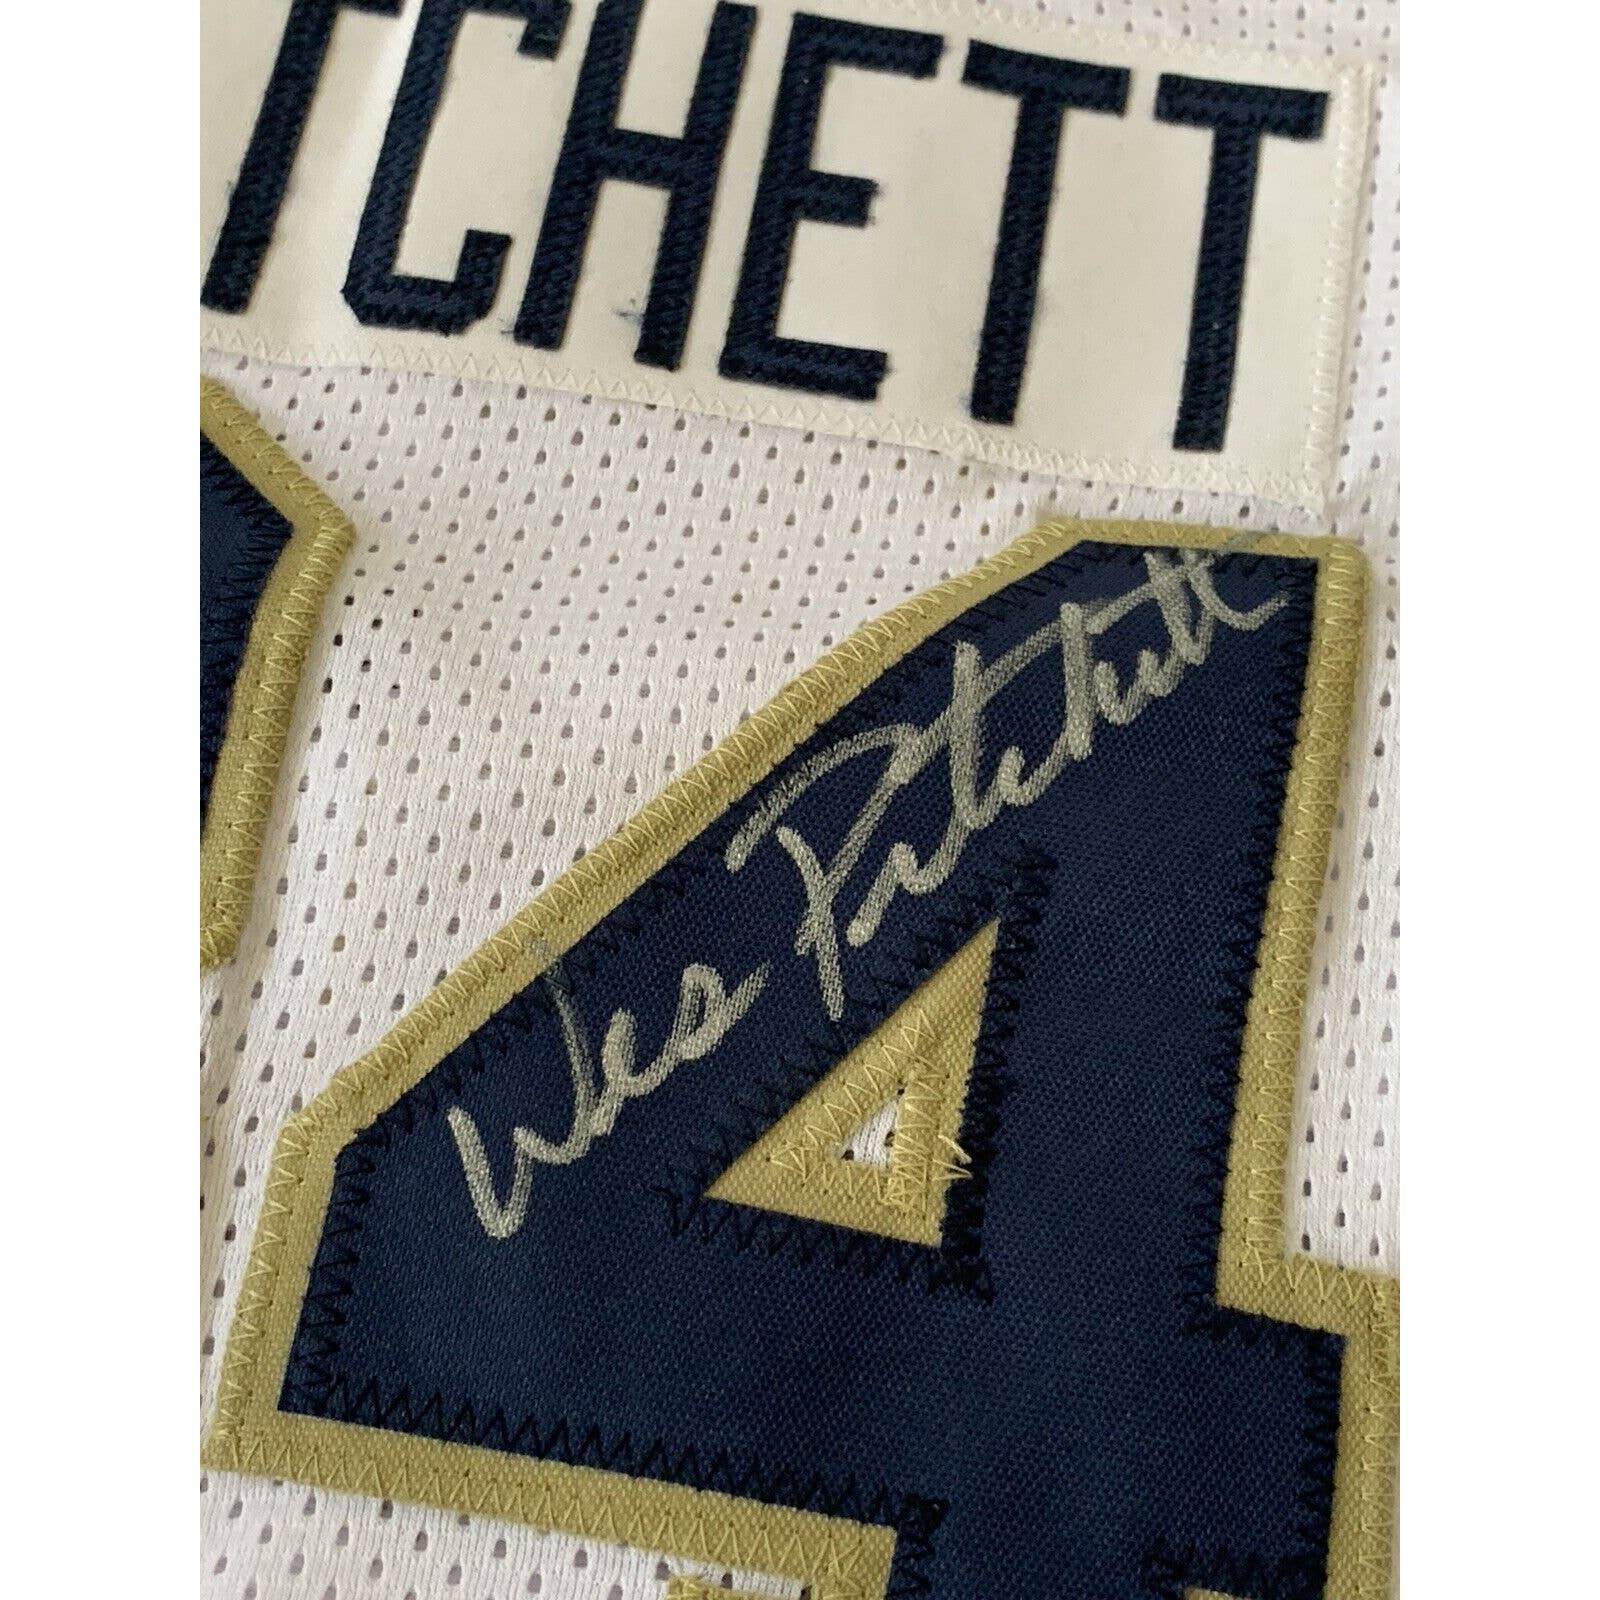 The Three Amigos Autographed/Signed Jersey Notre Dame Fighting Irish - TreasuresEvolved